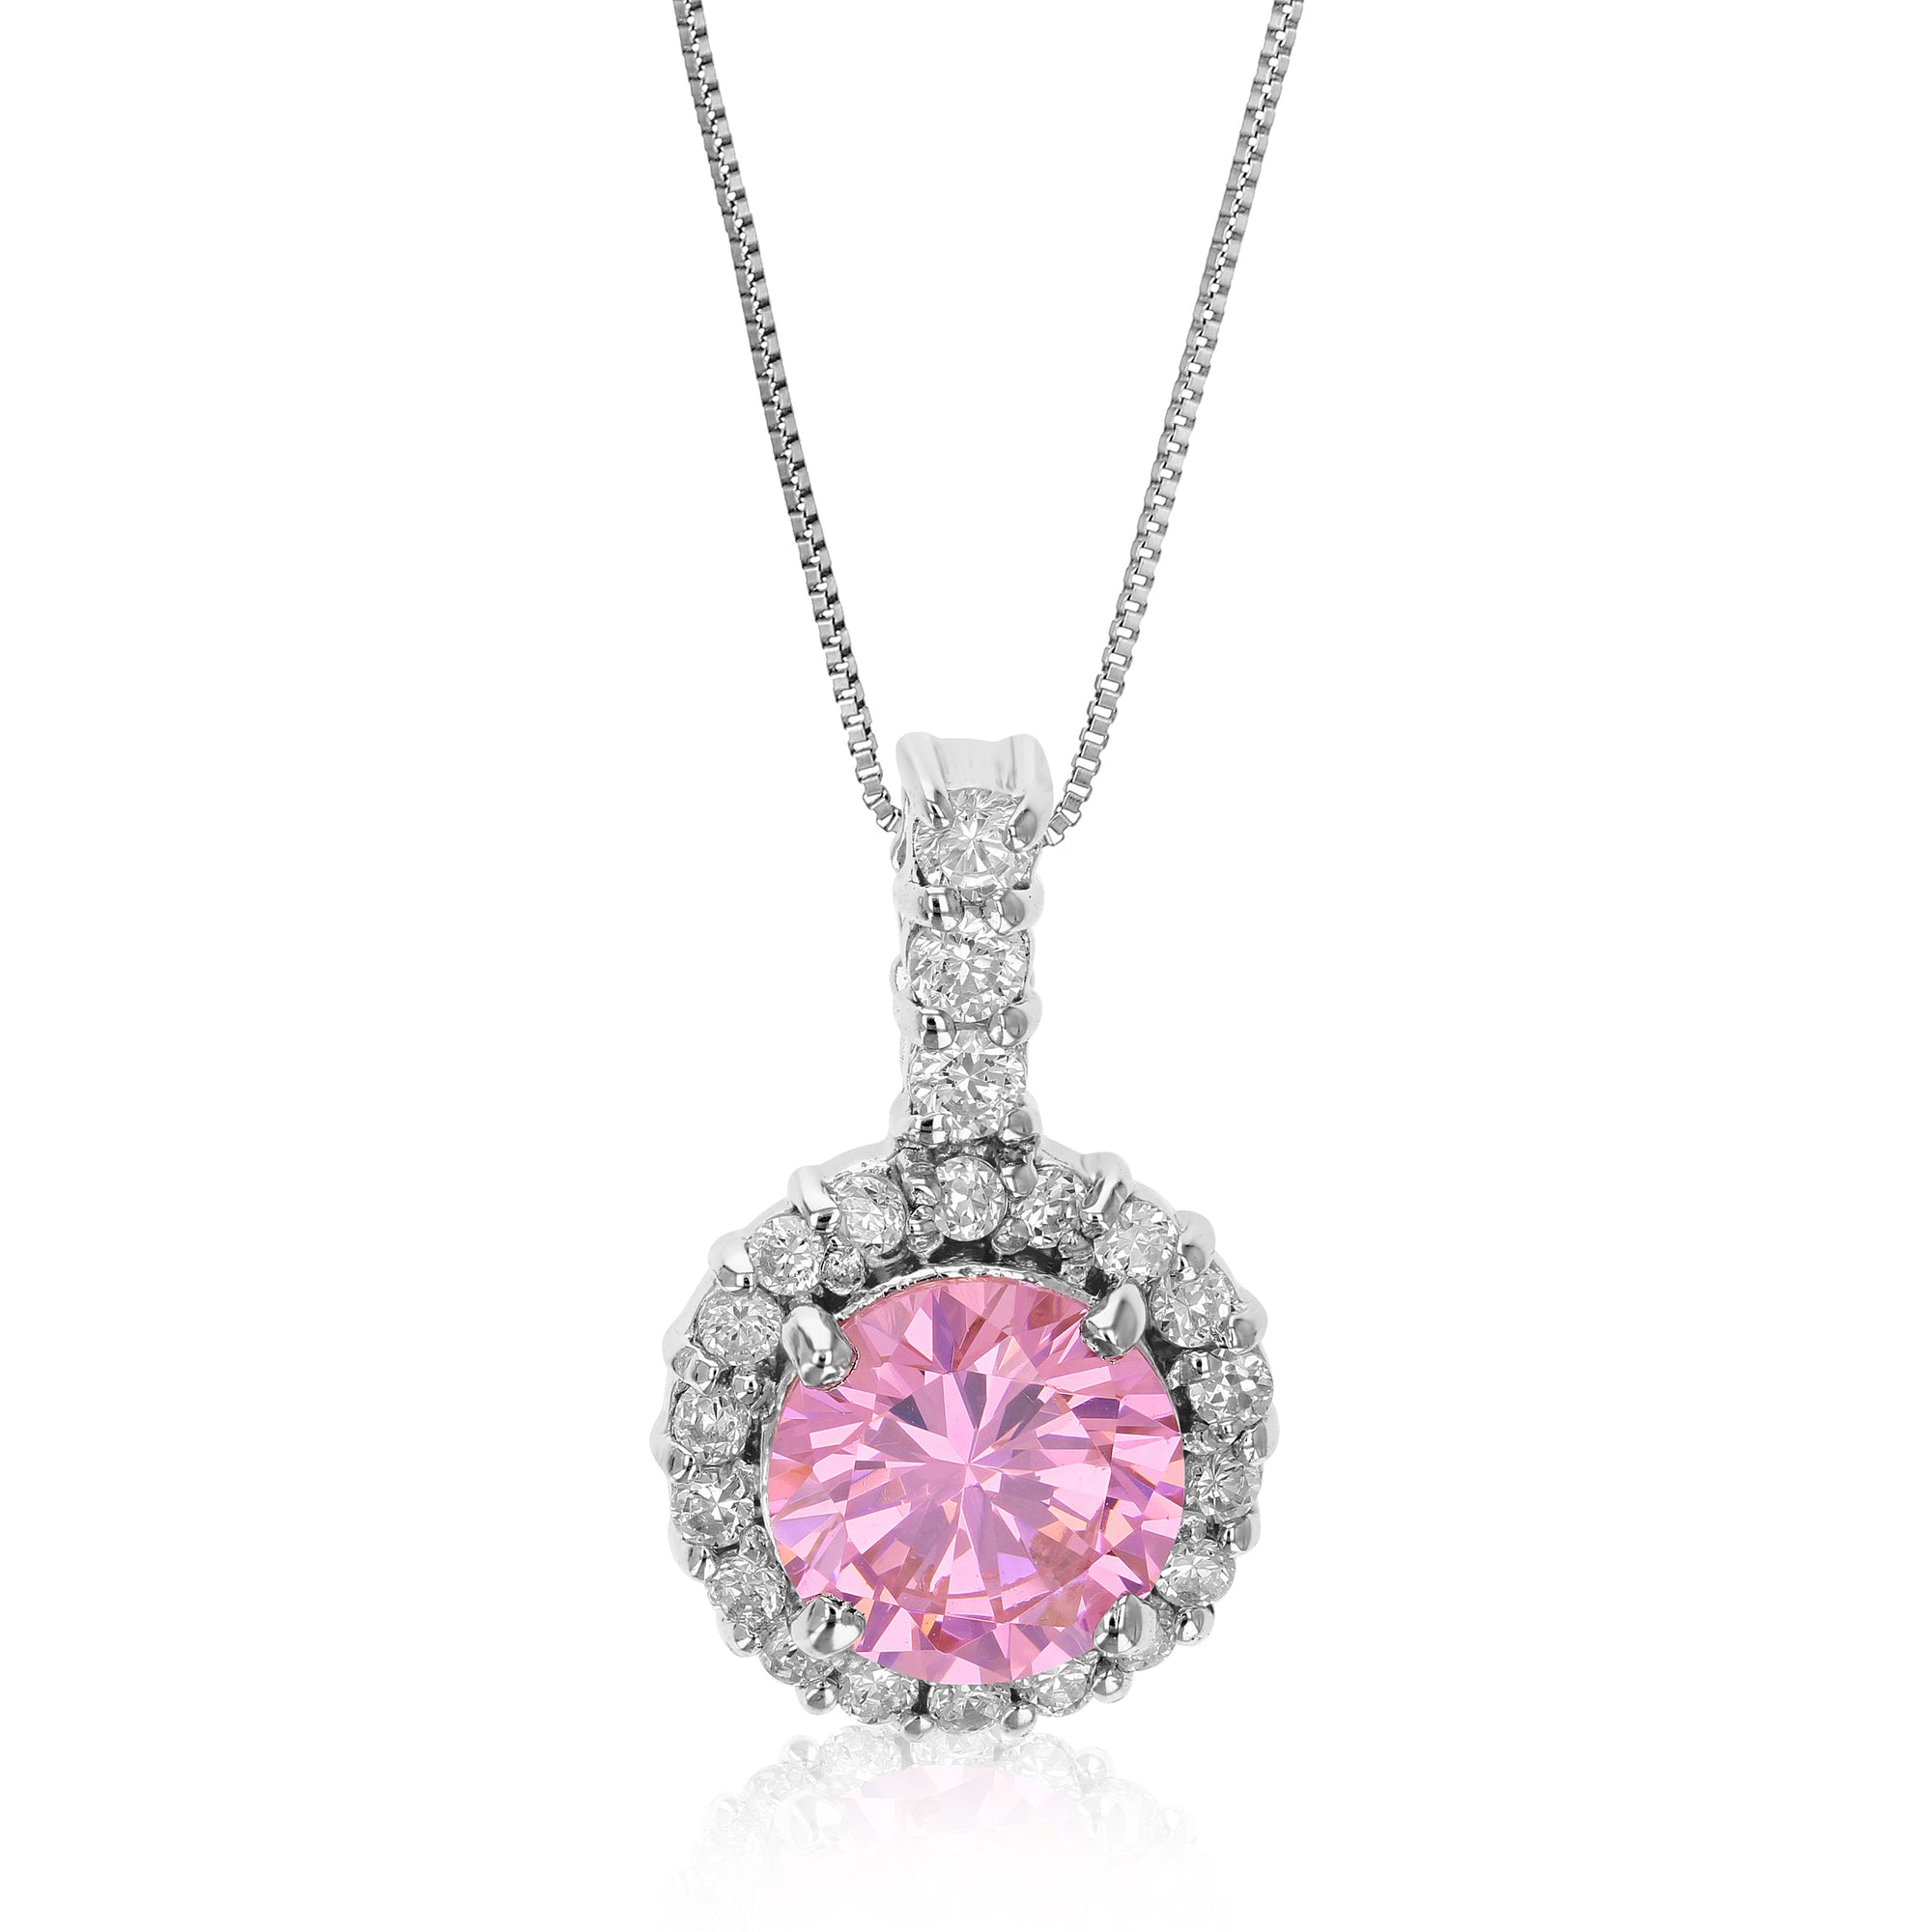 Pendant Necklace, Pink CZ Solitaire Pendant Necklace for Women in 0.925 Sterling Silver with 18 Inch Chain